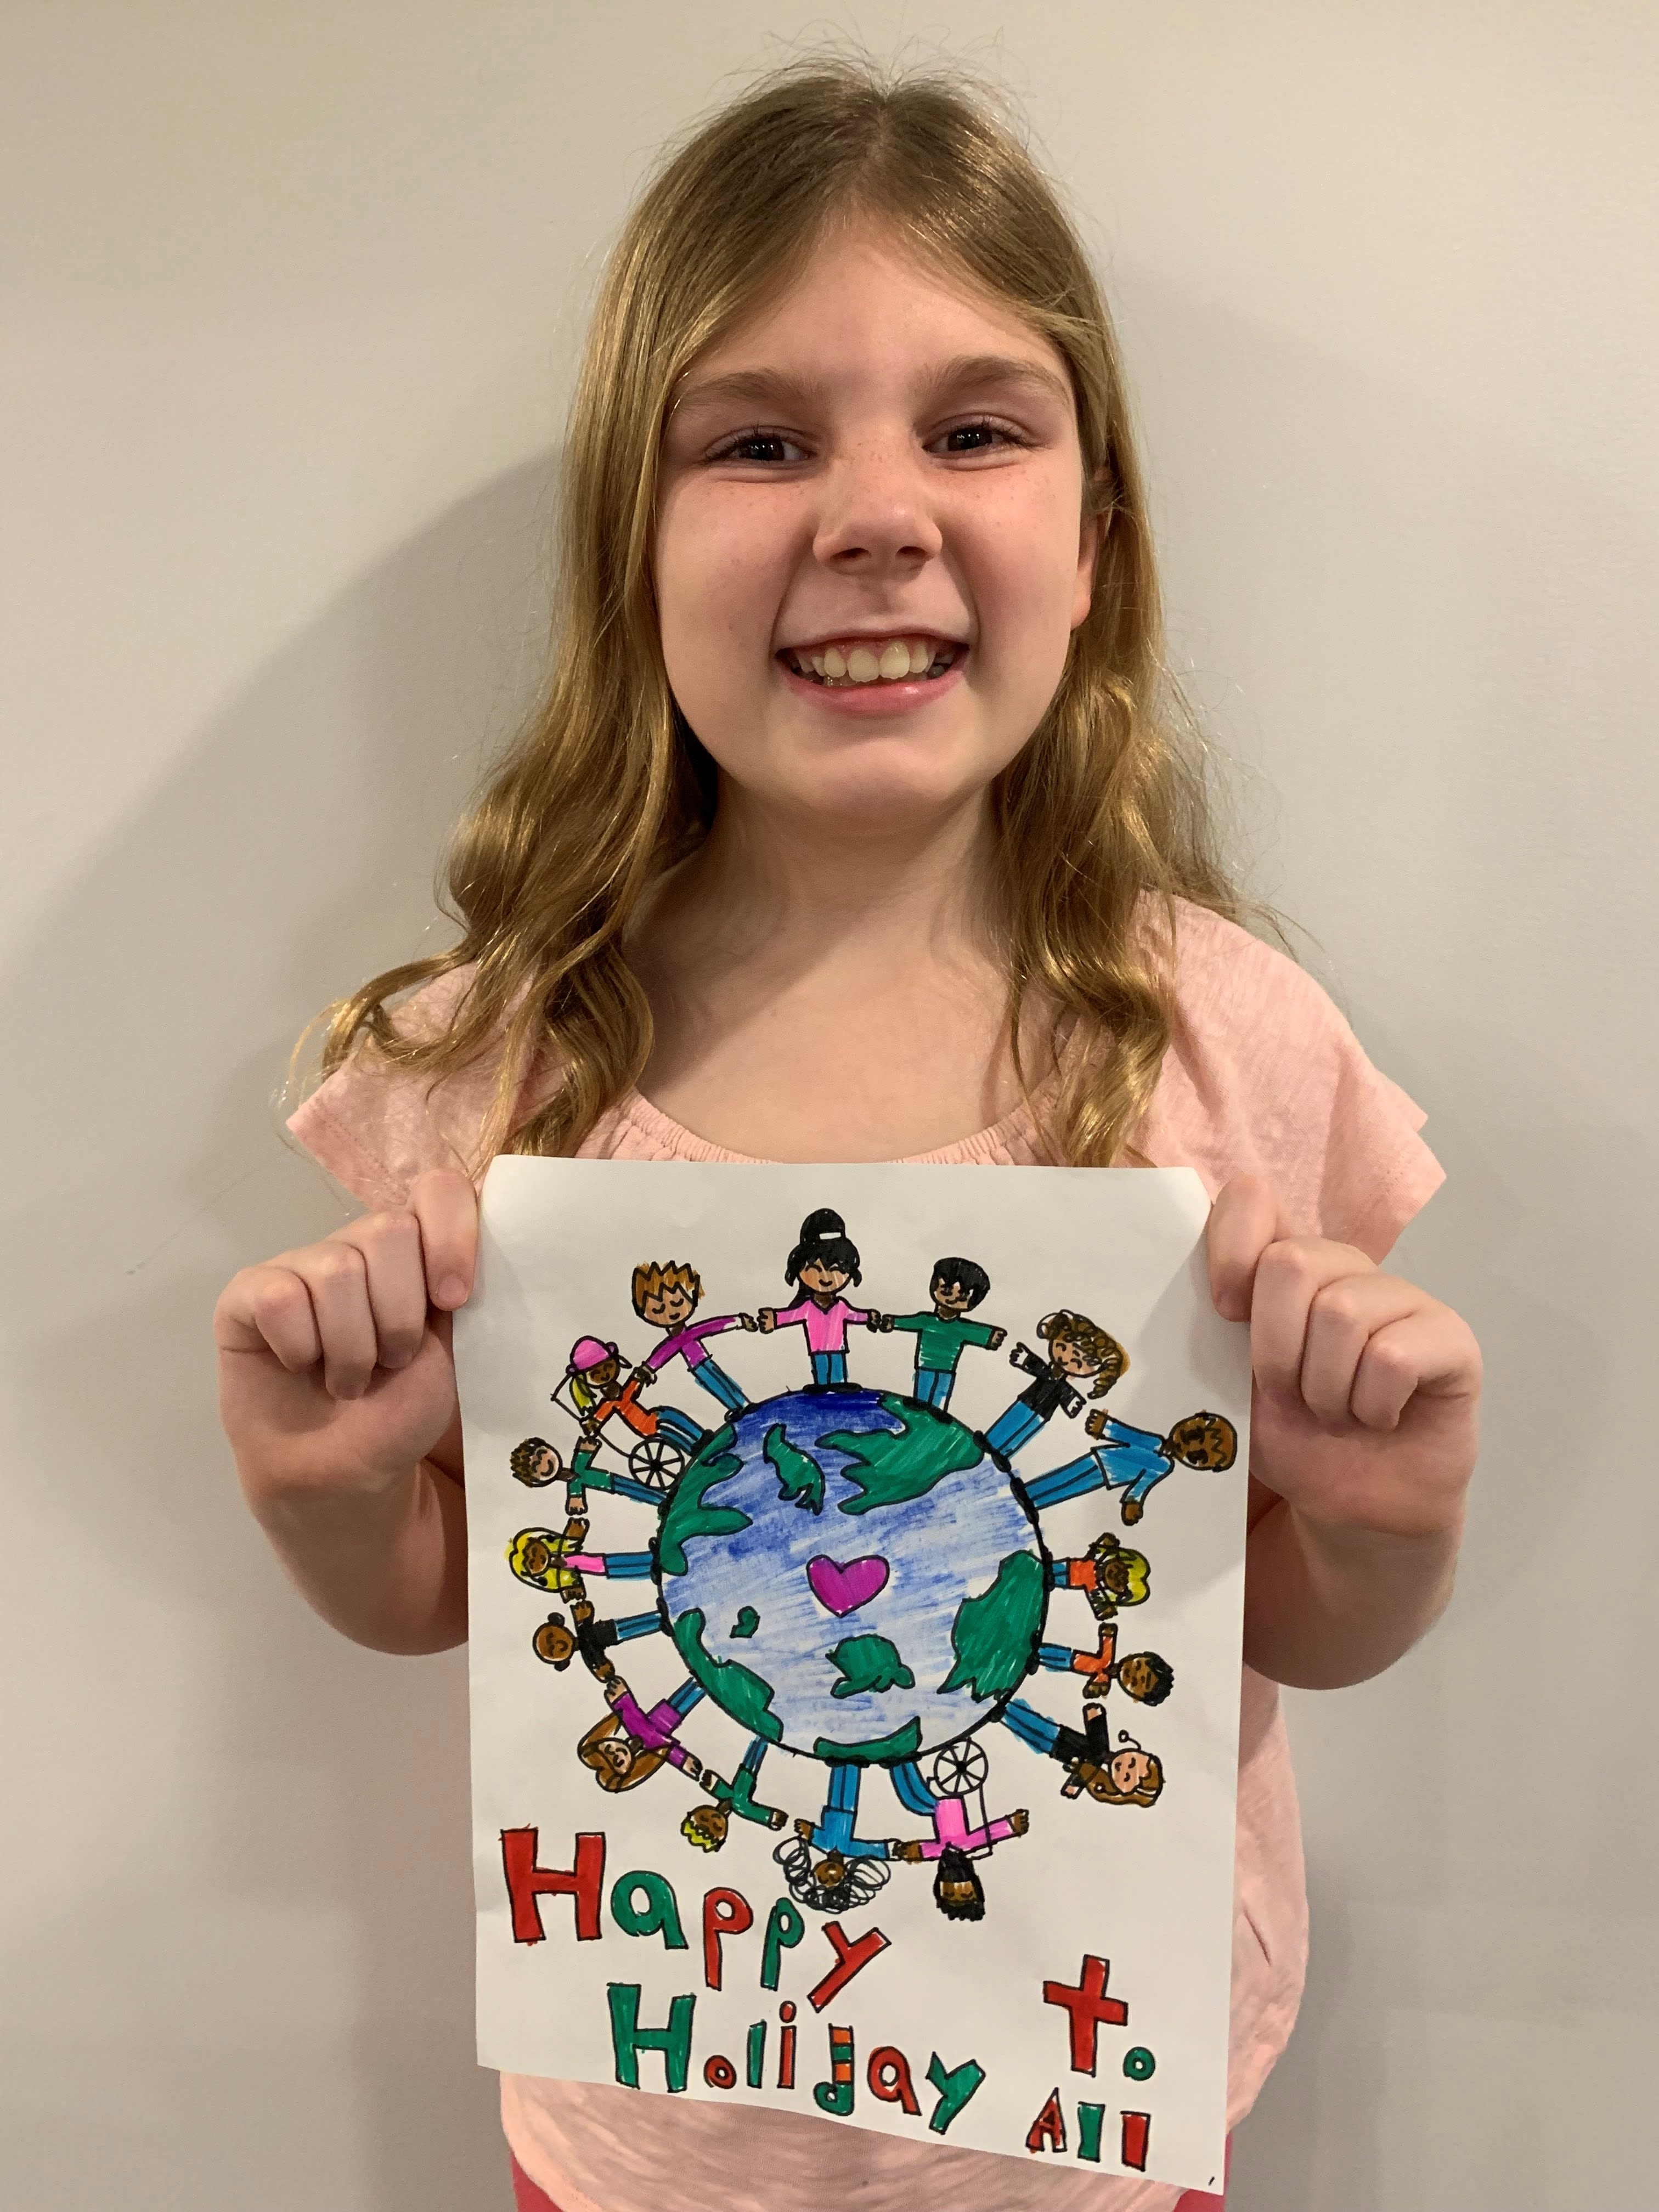 Kaelynne Folkes, 2021 Holiday Card Contest for Kids Grand Prize Winner.